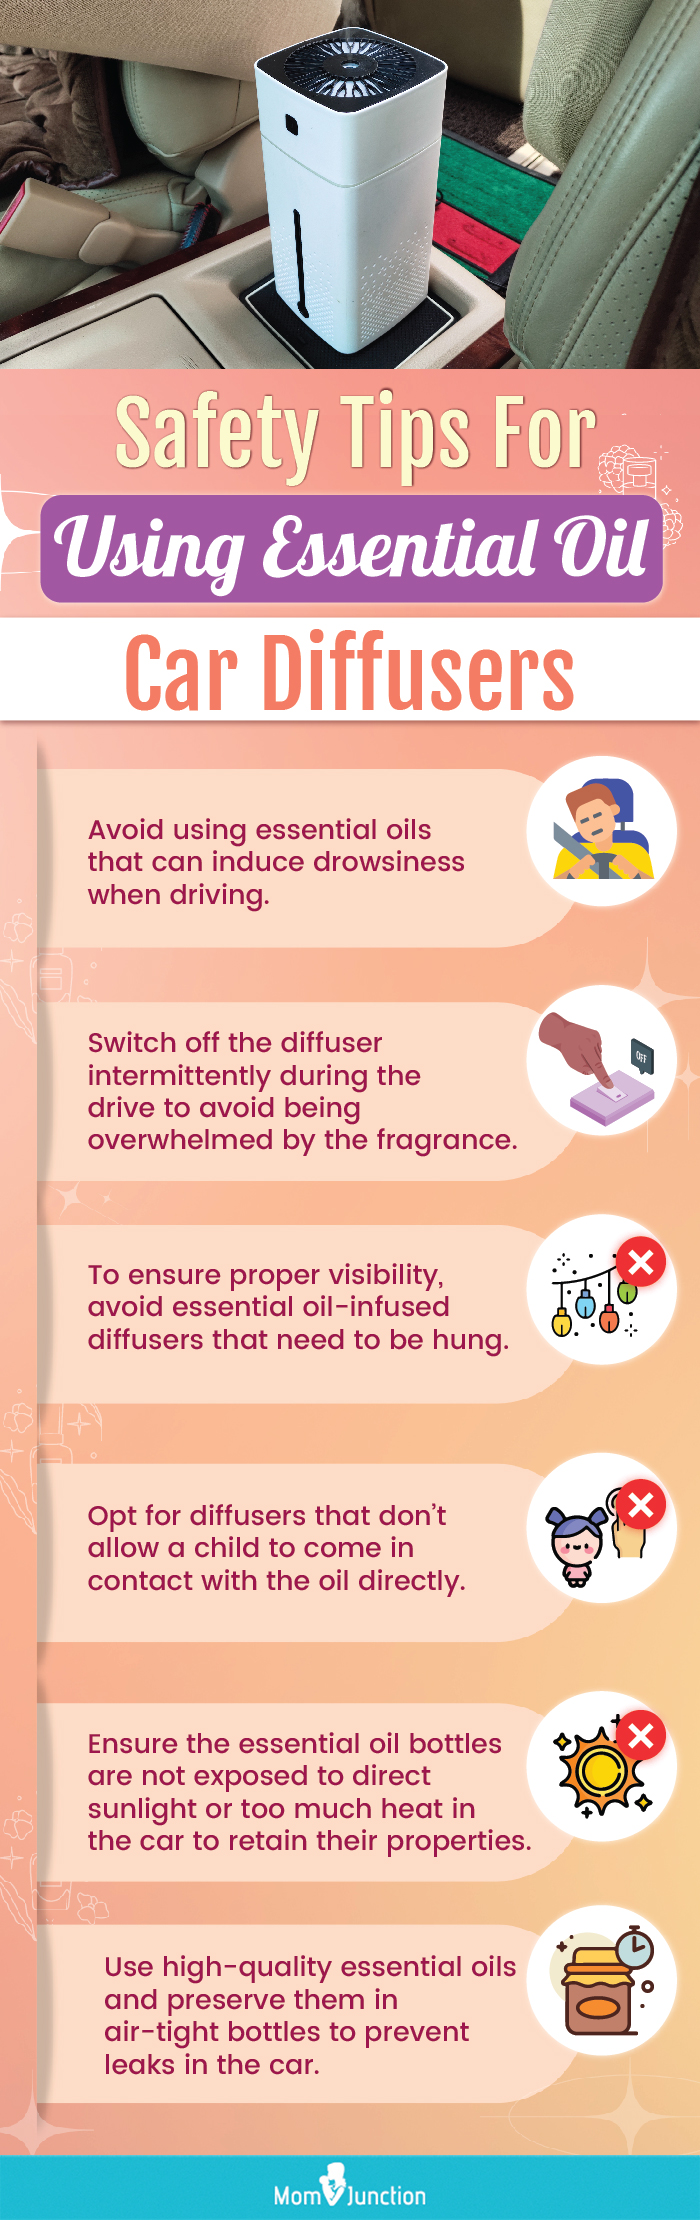 Safety Tips For Using Essential Oil Car Diffuser (Infographic)